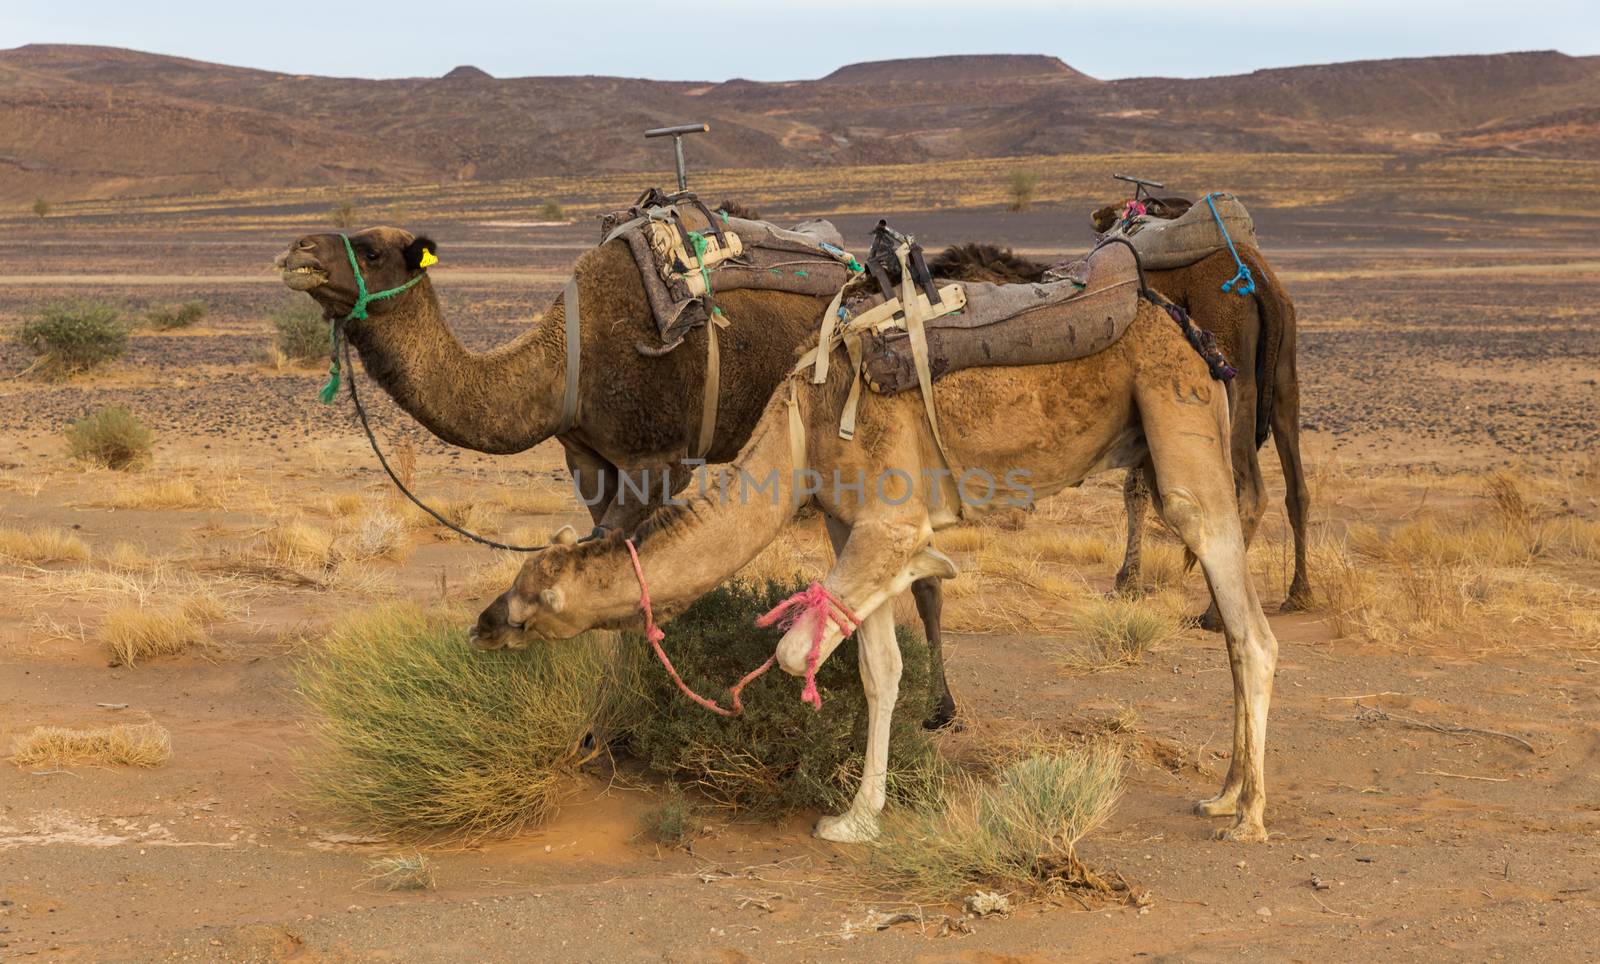 Camels eating the grass in Sahara desert, Morocco by Mieszko9